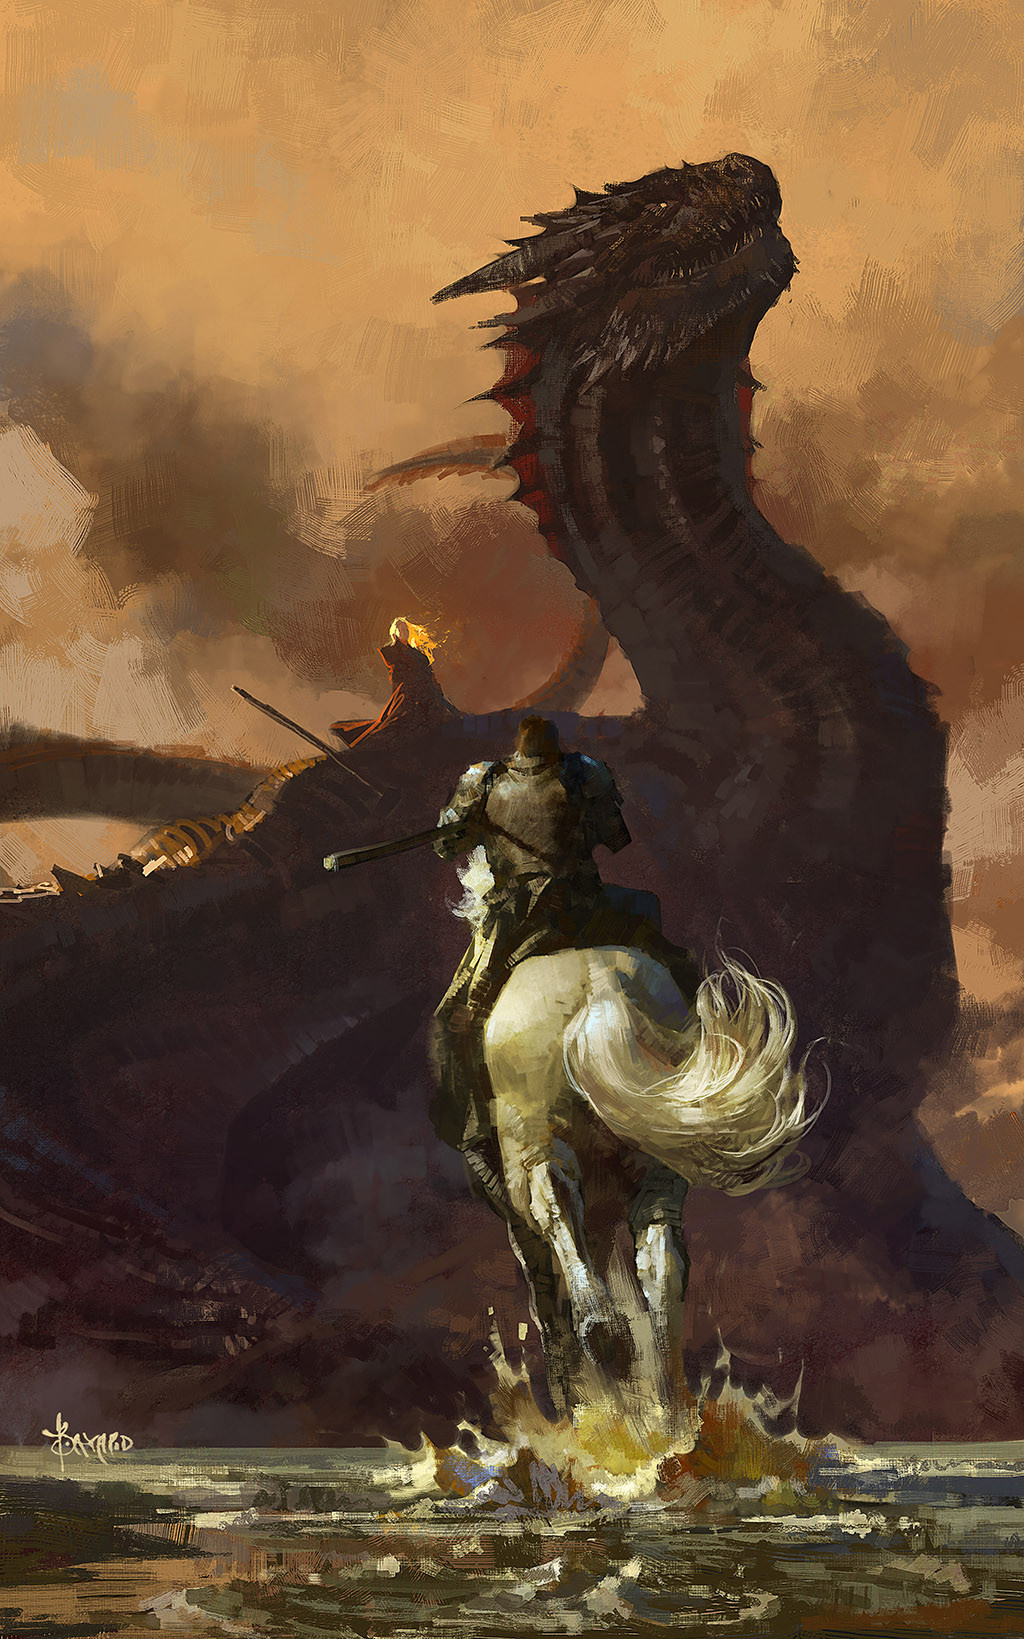 1boy 1girl a_song_of_ice_and_fire armor artist_name bayard_wu breastplate charging_forward clouds cloudy_sky commentary daenerys_targaryen dragon dragon_riding drogon english_commentary facing_away fantasy game_of_thrones highres horns horse horseback_riding jaime_lannister open_mouth orange_sky outdoors painterly pauldrons realistic riding sharp_teeth shoulder_armor sky tail teeth water western_dragon wide_shot wings yellow_eyes